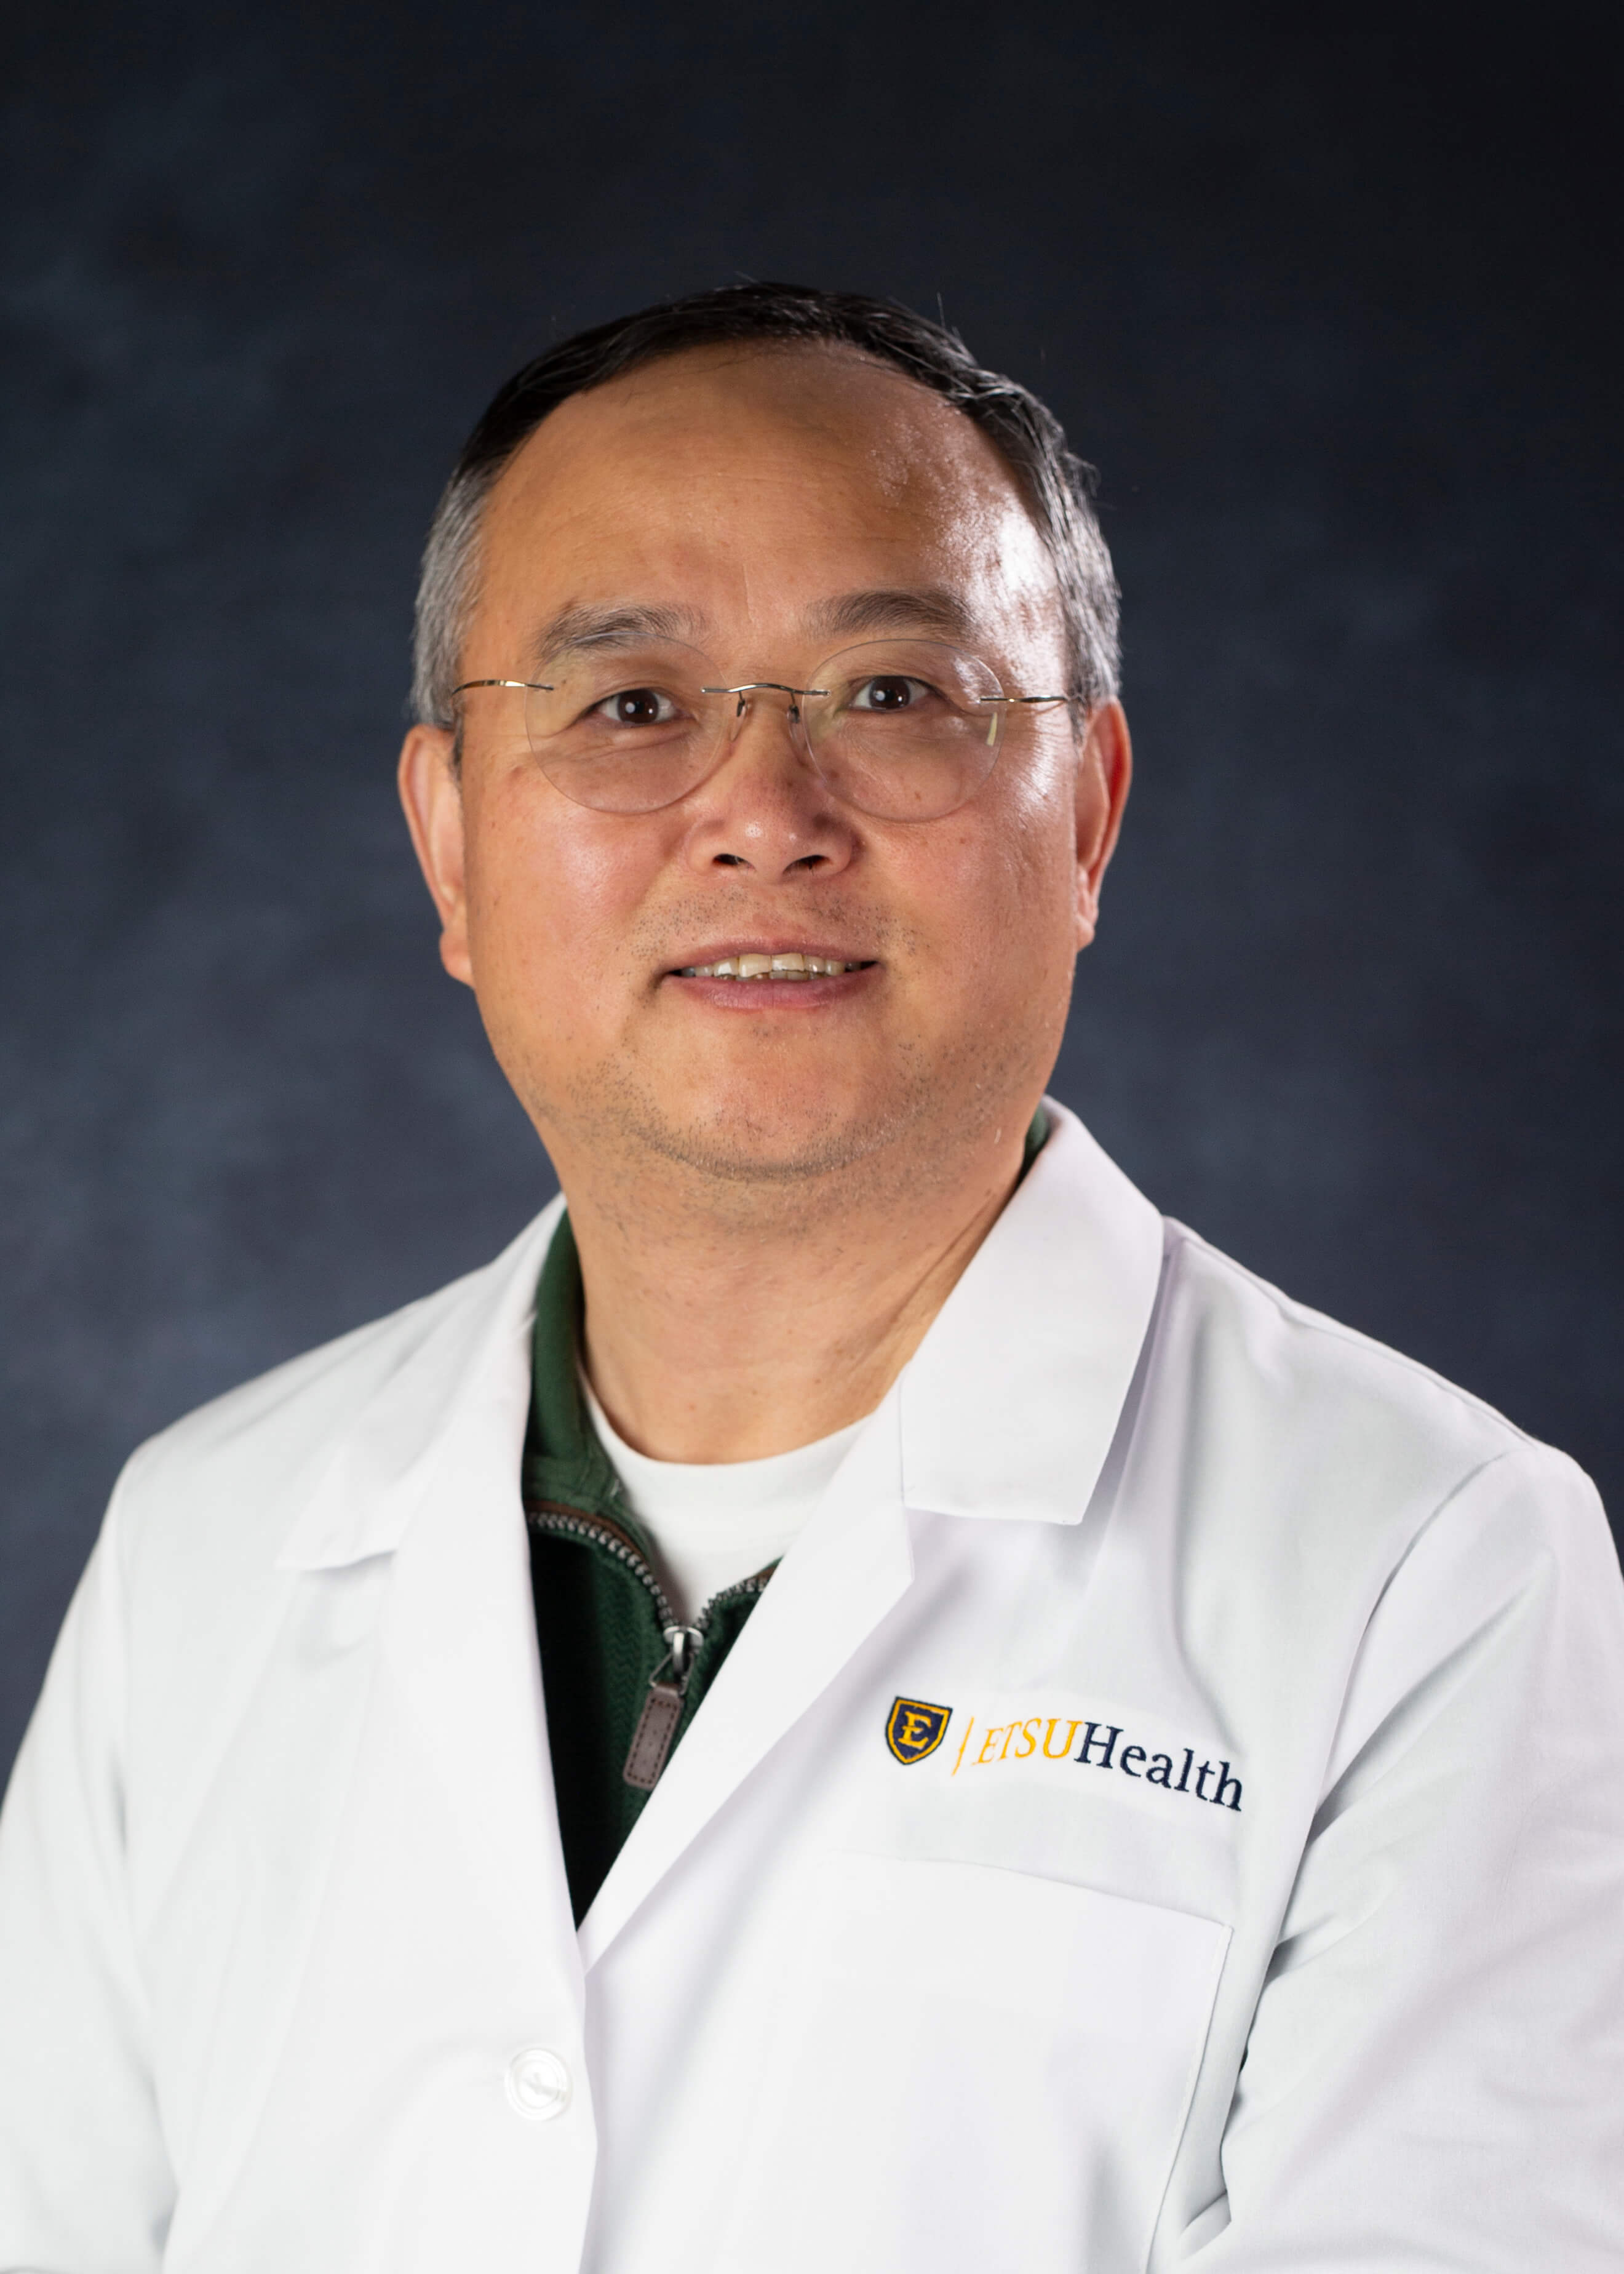 Photo of Yao, Zhi Qiang MD, PhD Division Chief - Research, Professor